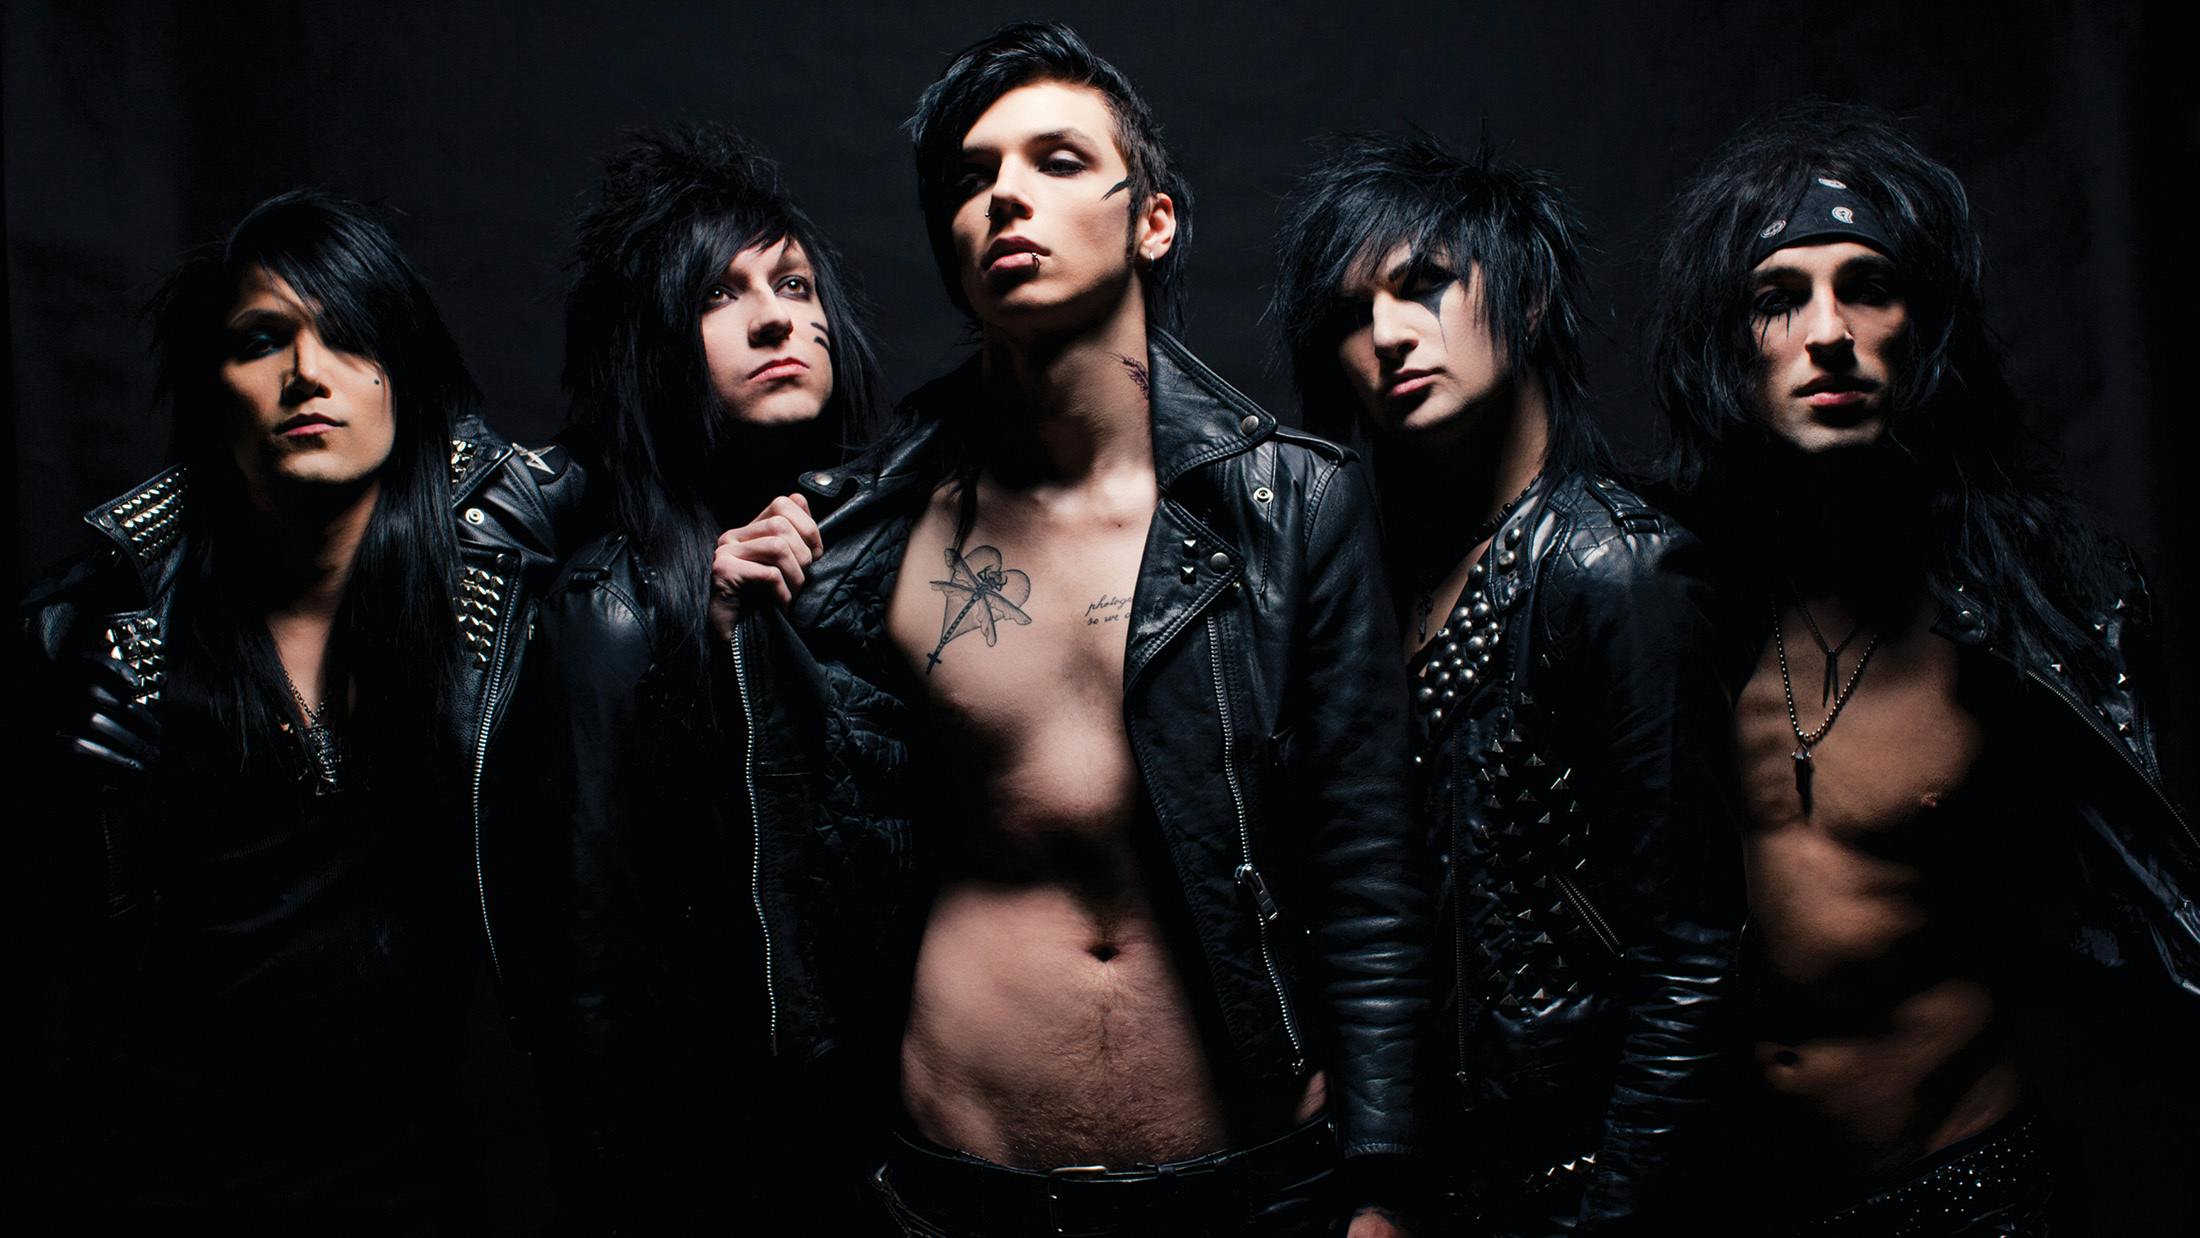 How I Wrote In The End, By Black Veil Brides' Andy Biersack